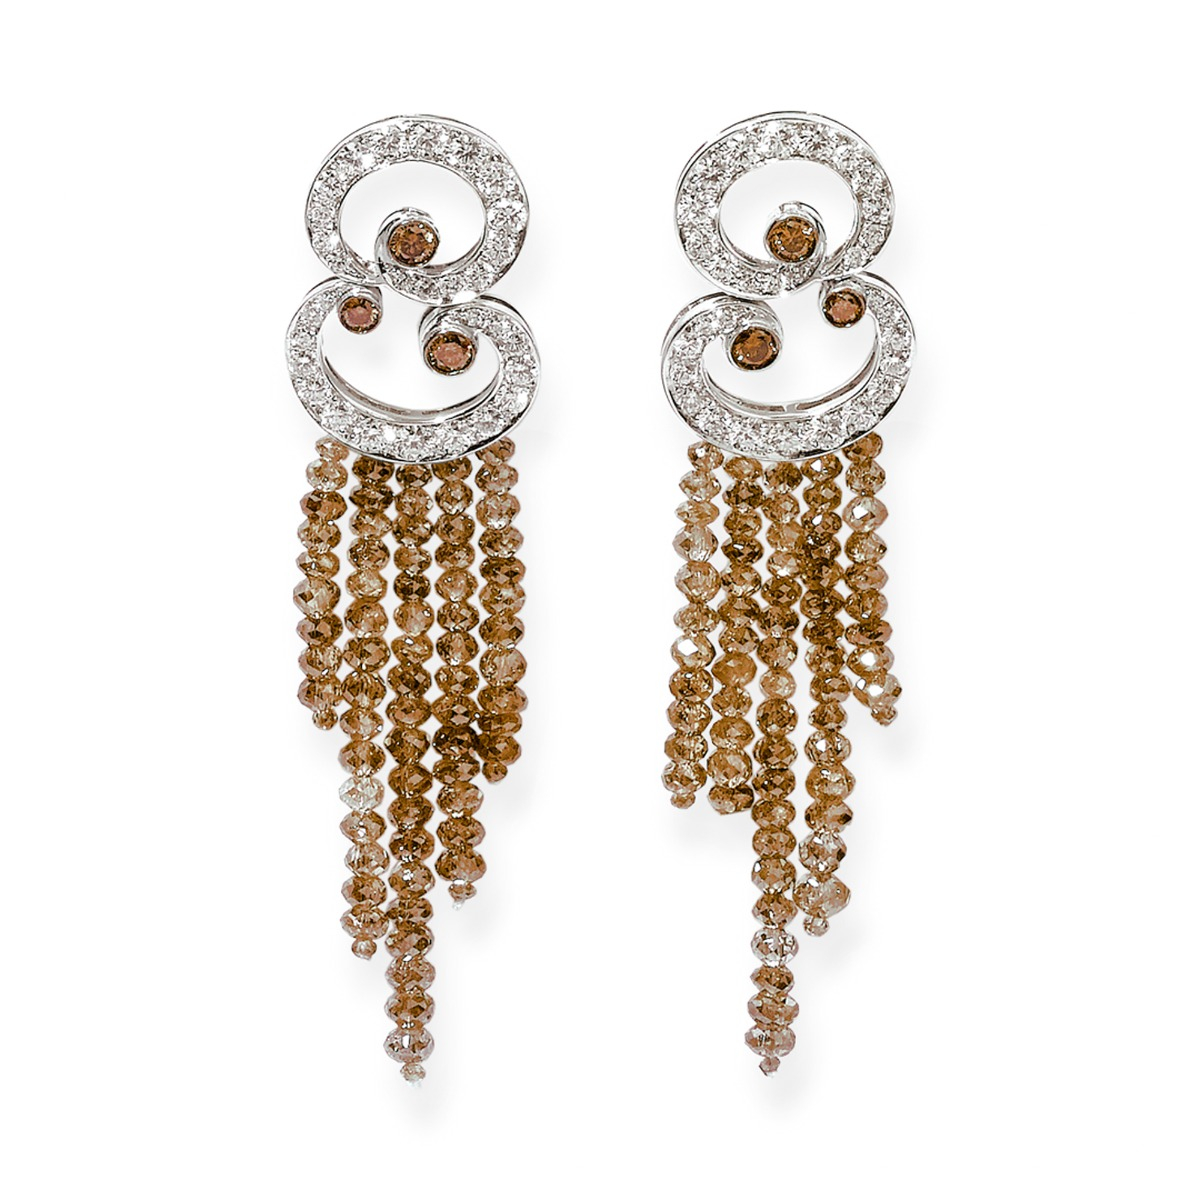 Indian Style Cognac and White Diamond Earrings with Diamond Strands 